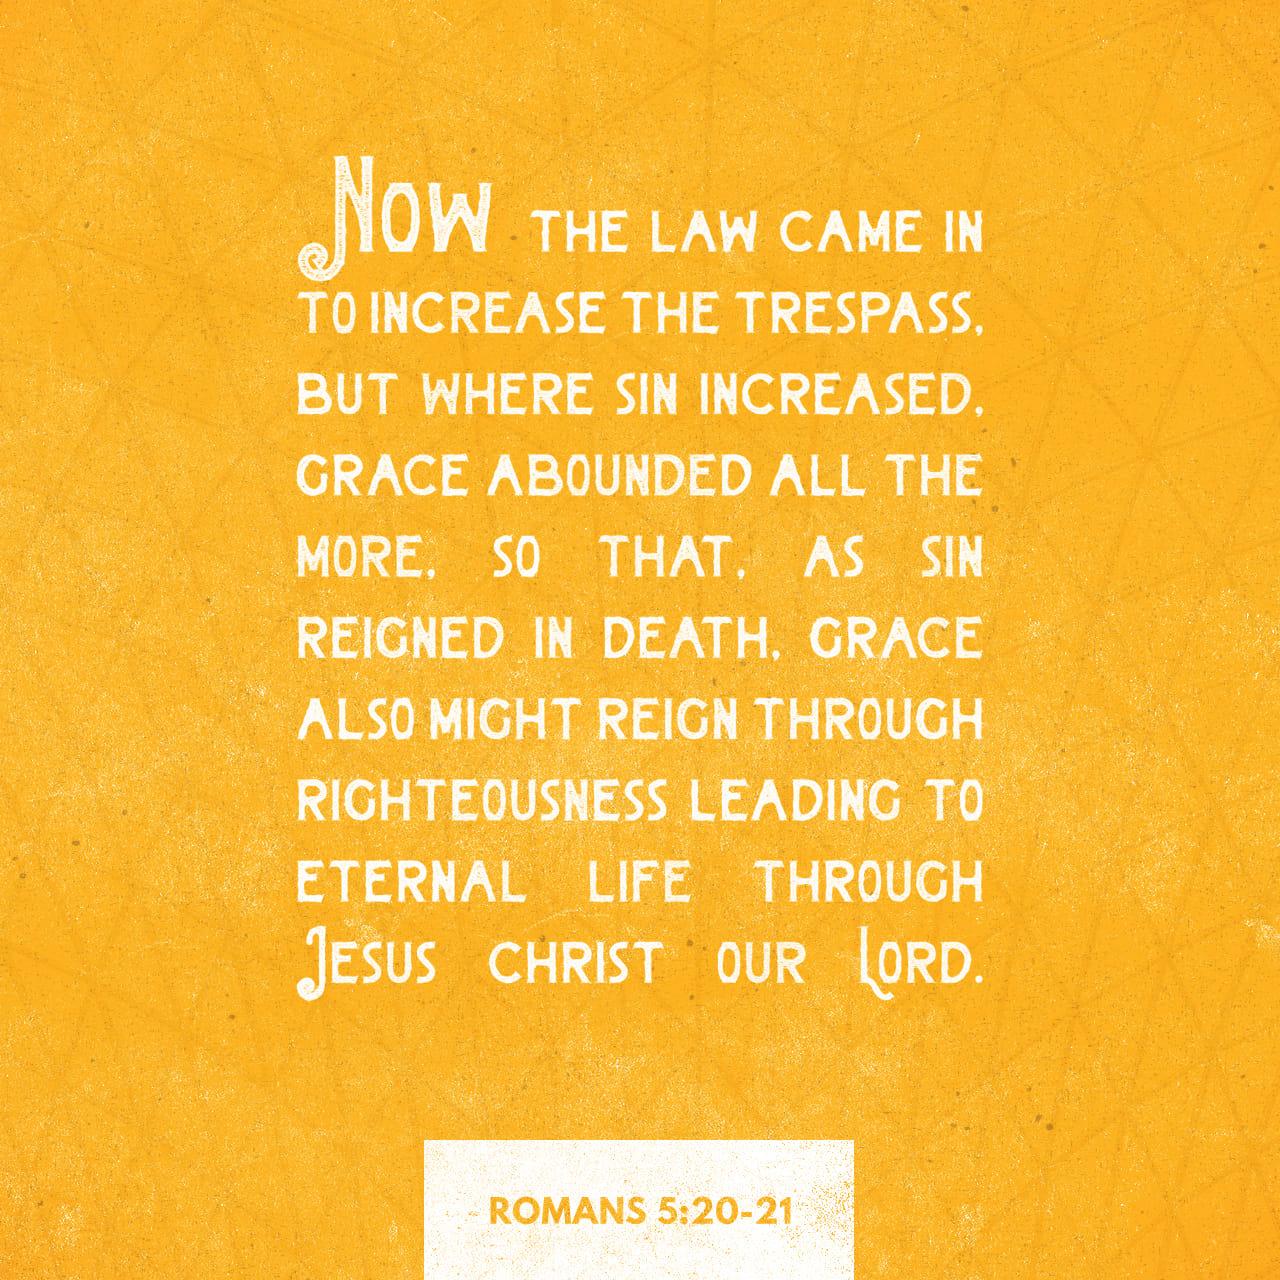 Bible Verse of the Day - day 89 - image 430 (Romans 5:12-21)